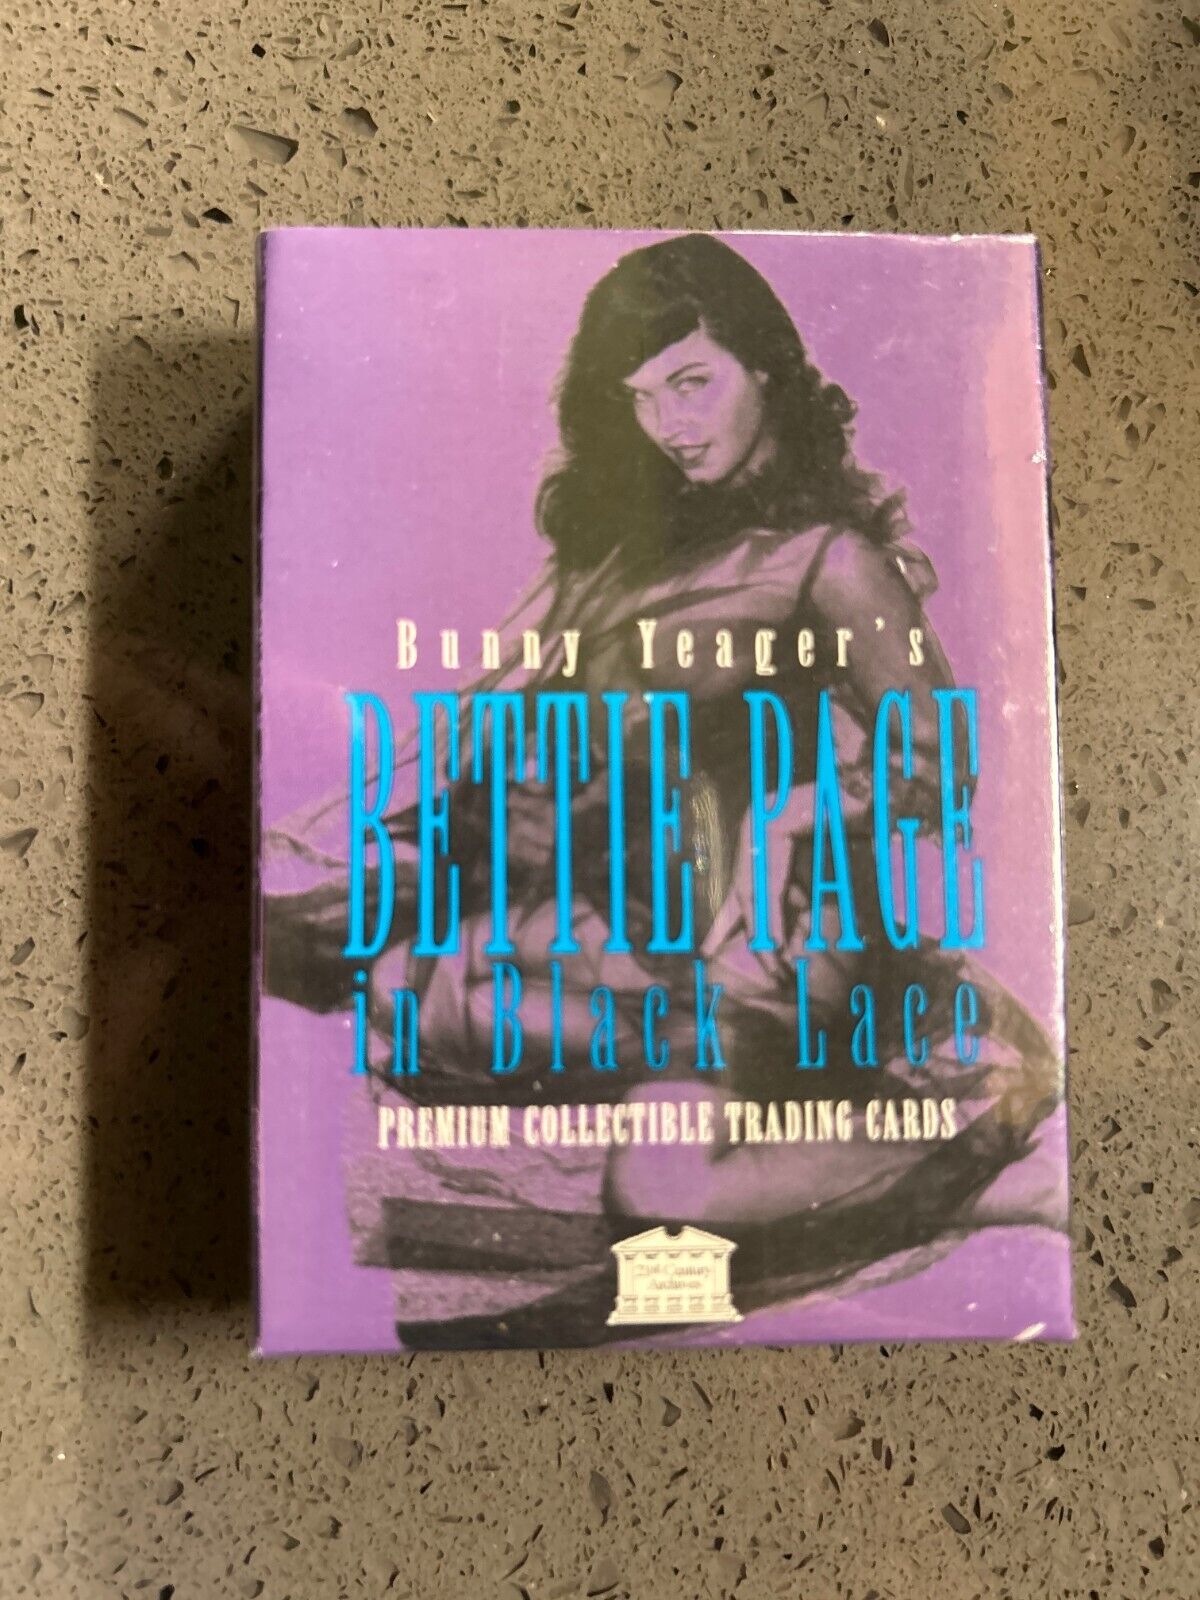 Vintage Bunny Yeager\'s Bettie Page In Black Lace Trading Card Set Sealed Box Set